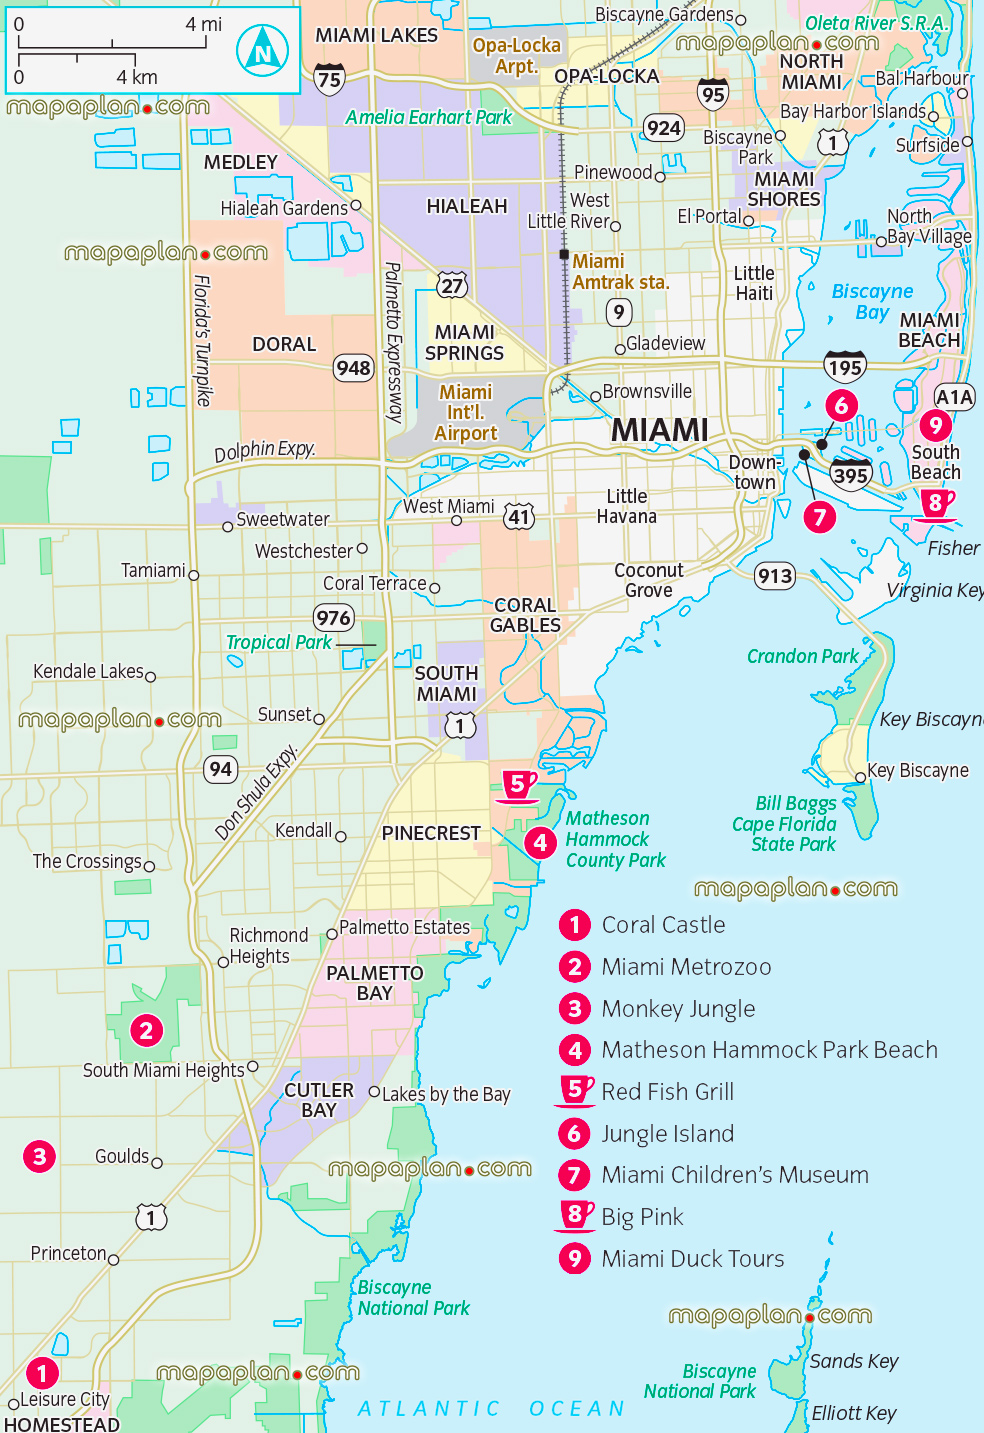 Miami city detailed families kids coral castle monkey jungle island childrens museum Miami central free download offline city top attractions places great things do explore fun interesting ideas where go around central areas